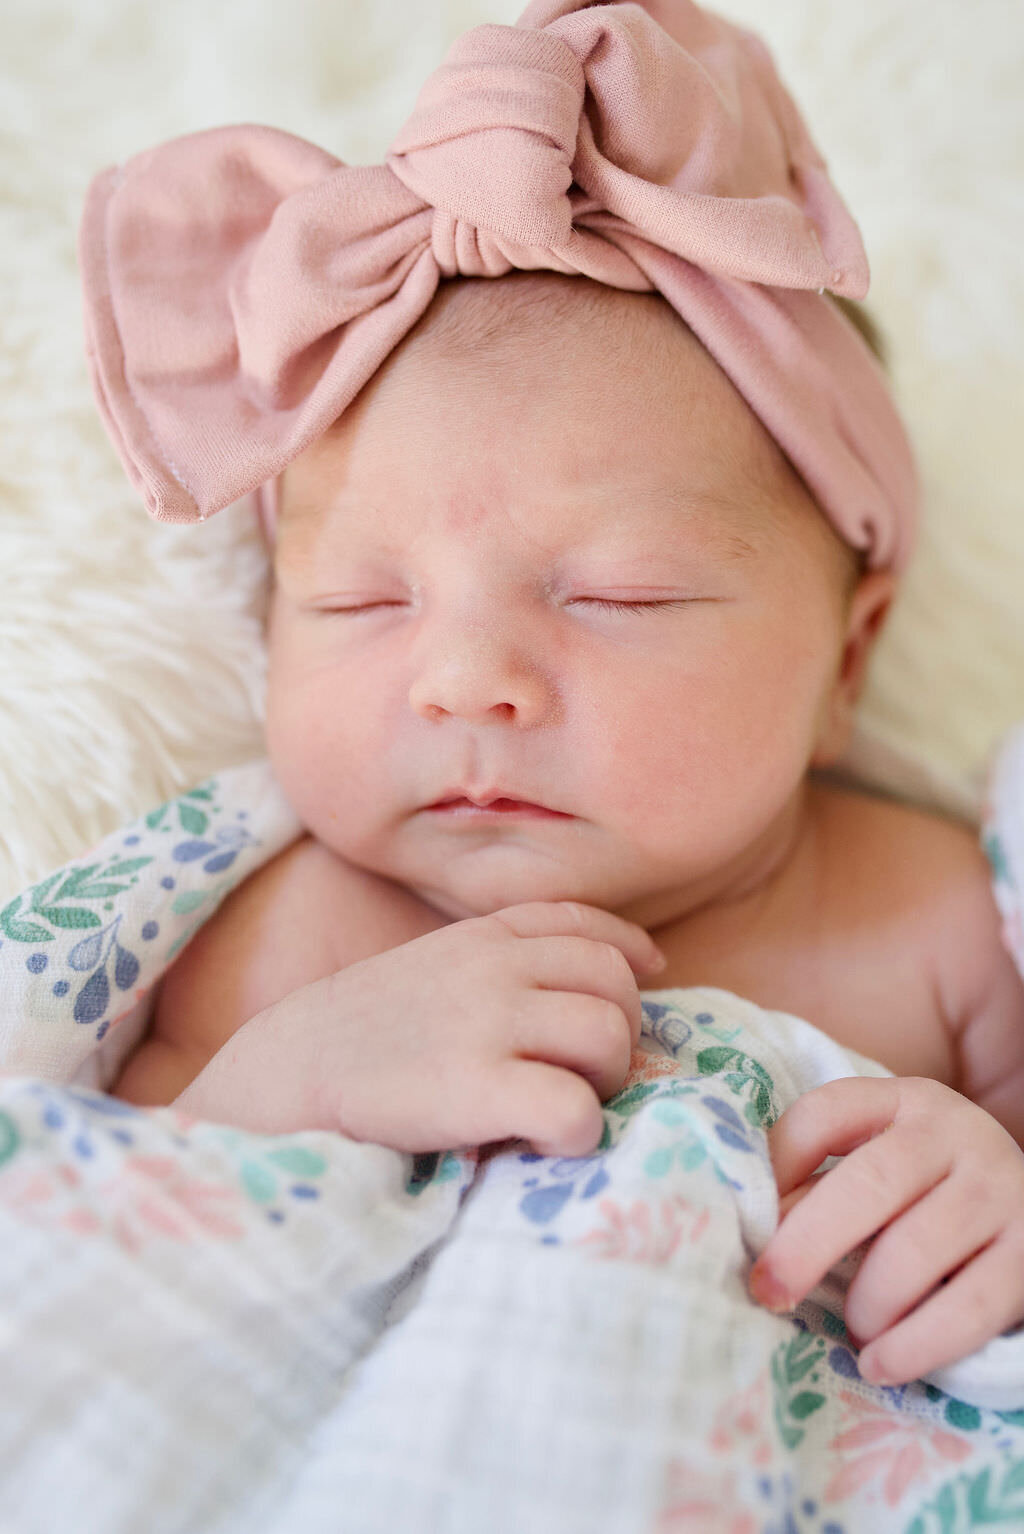 A newborn with a pink bow on sleeping soundly.